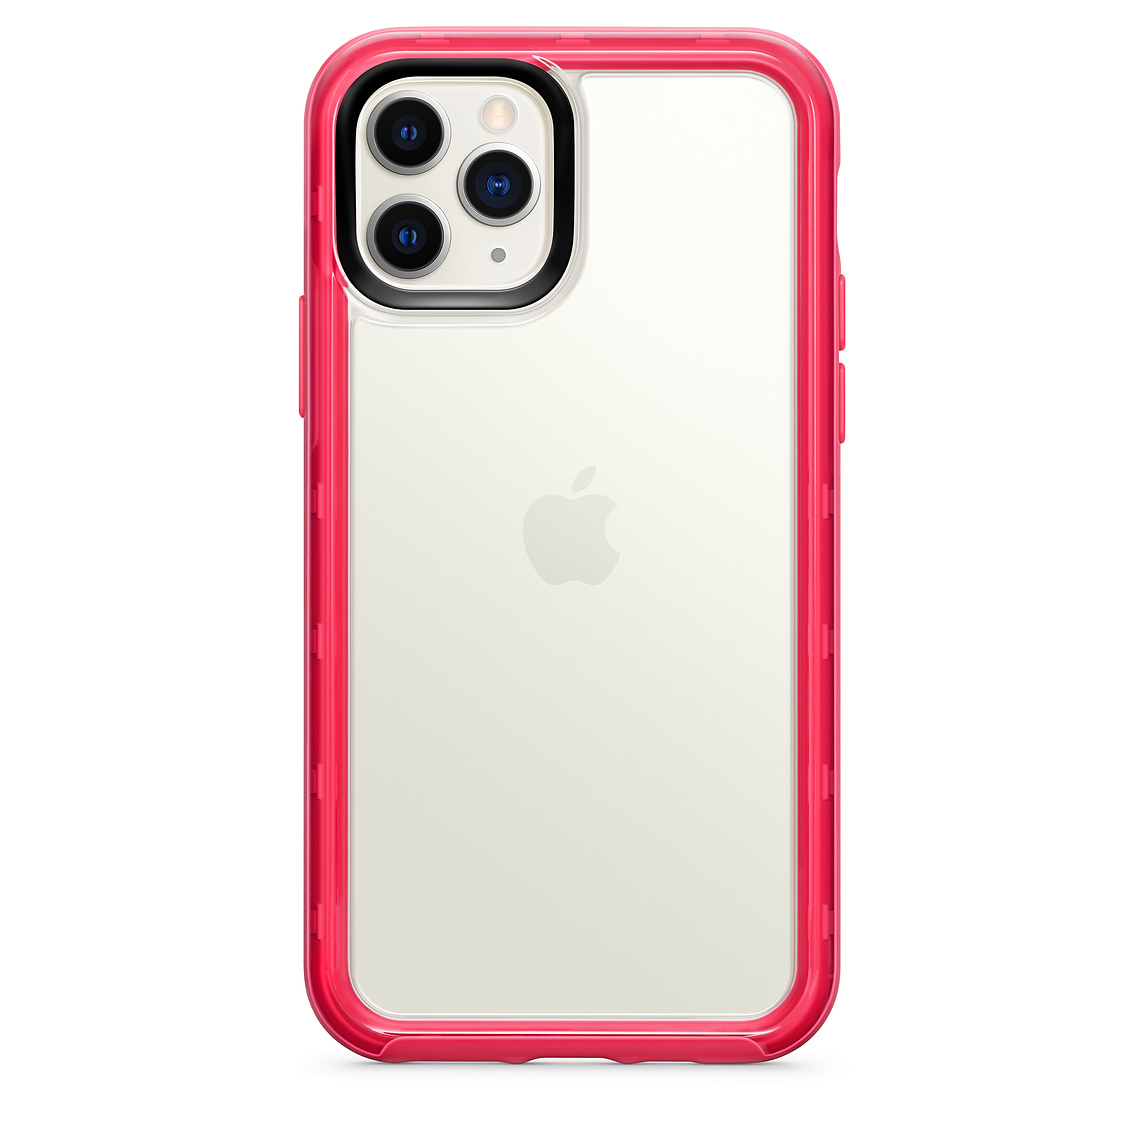 iPhone 11 Pro clear case from OtterBox